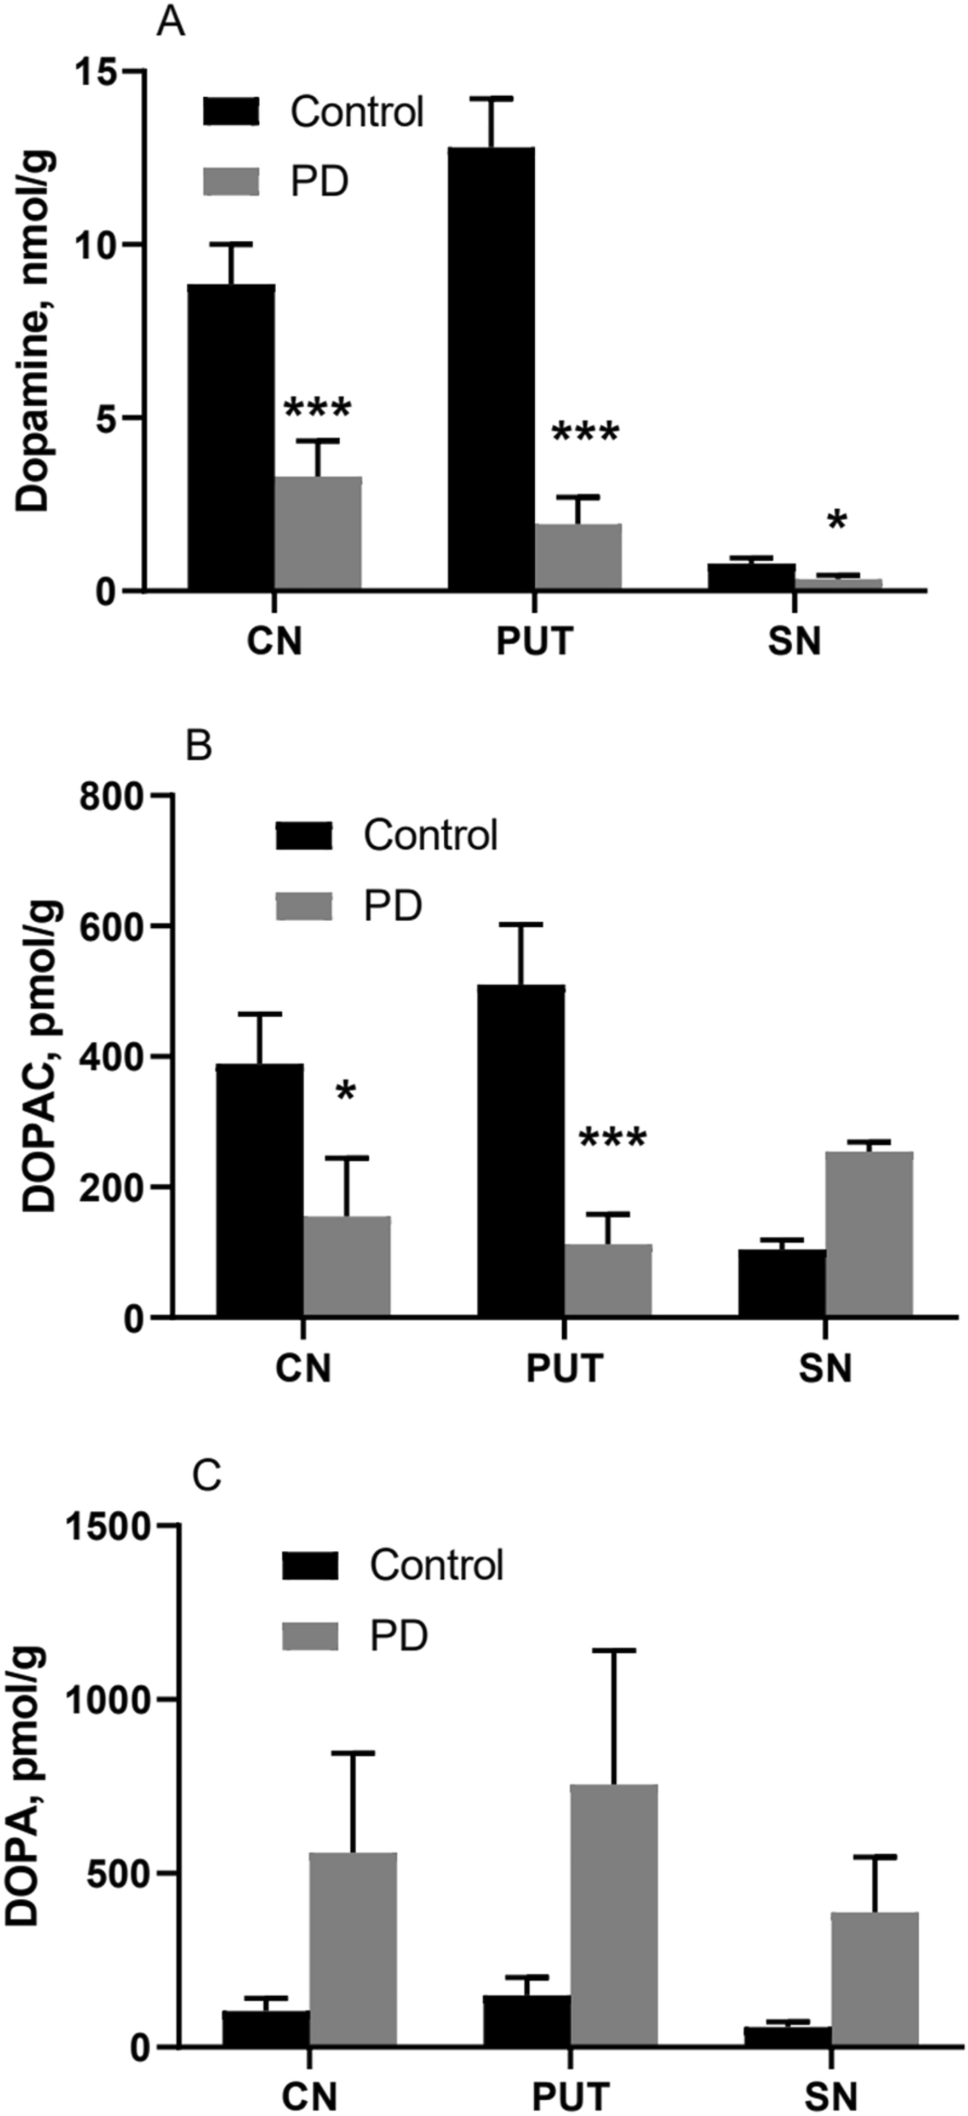 Oxidation of dopamine and related catechols in dopaminergic brain regions in Parkinson’s disease and during ageing in non-Parkinsonian subjects